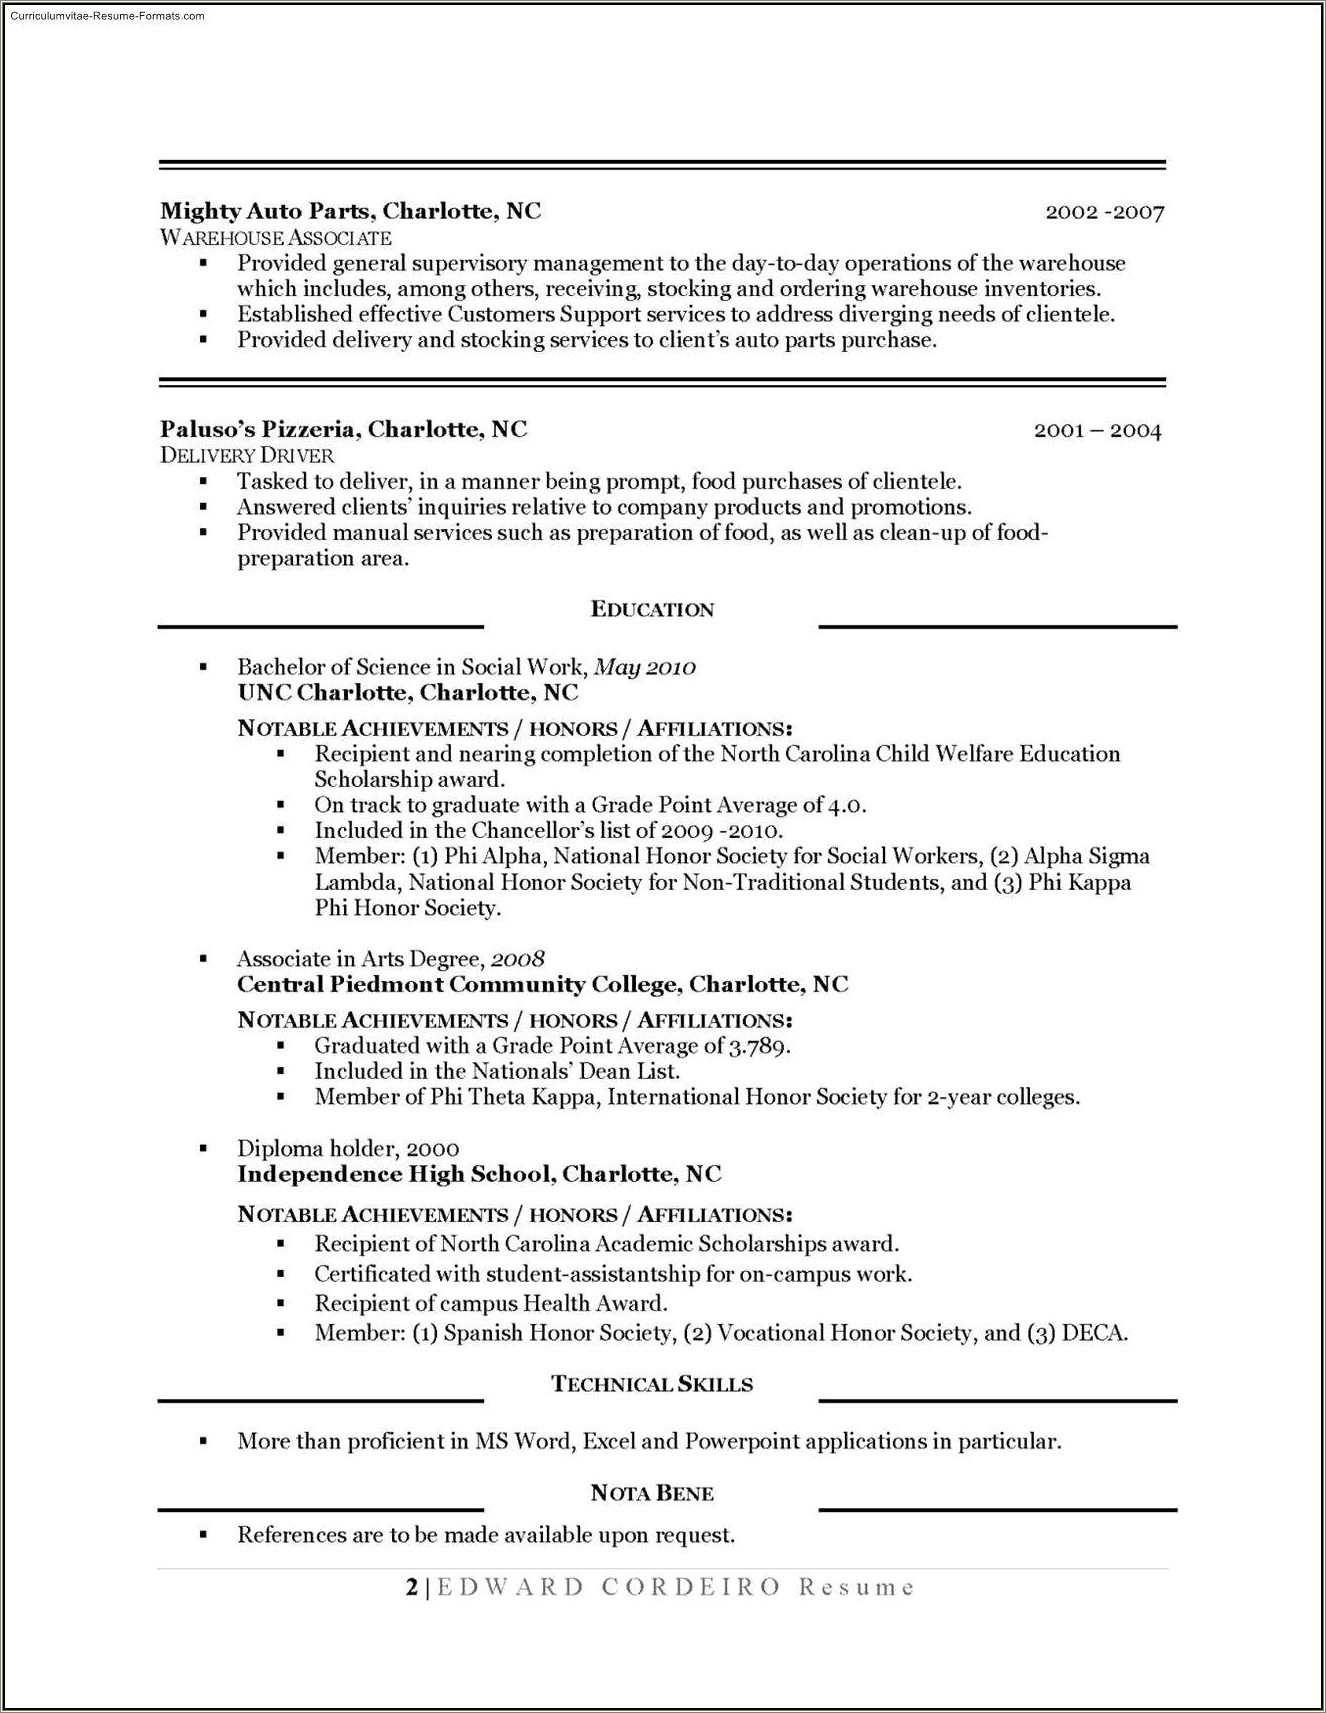 Work Or Education First On Resume